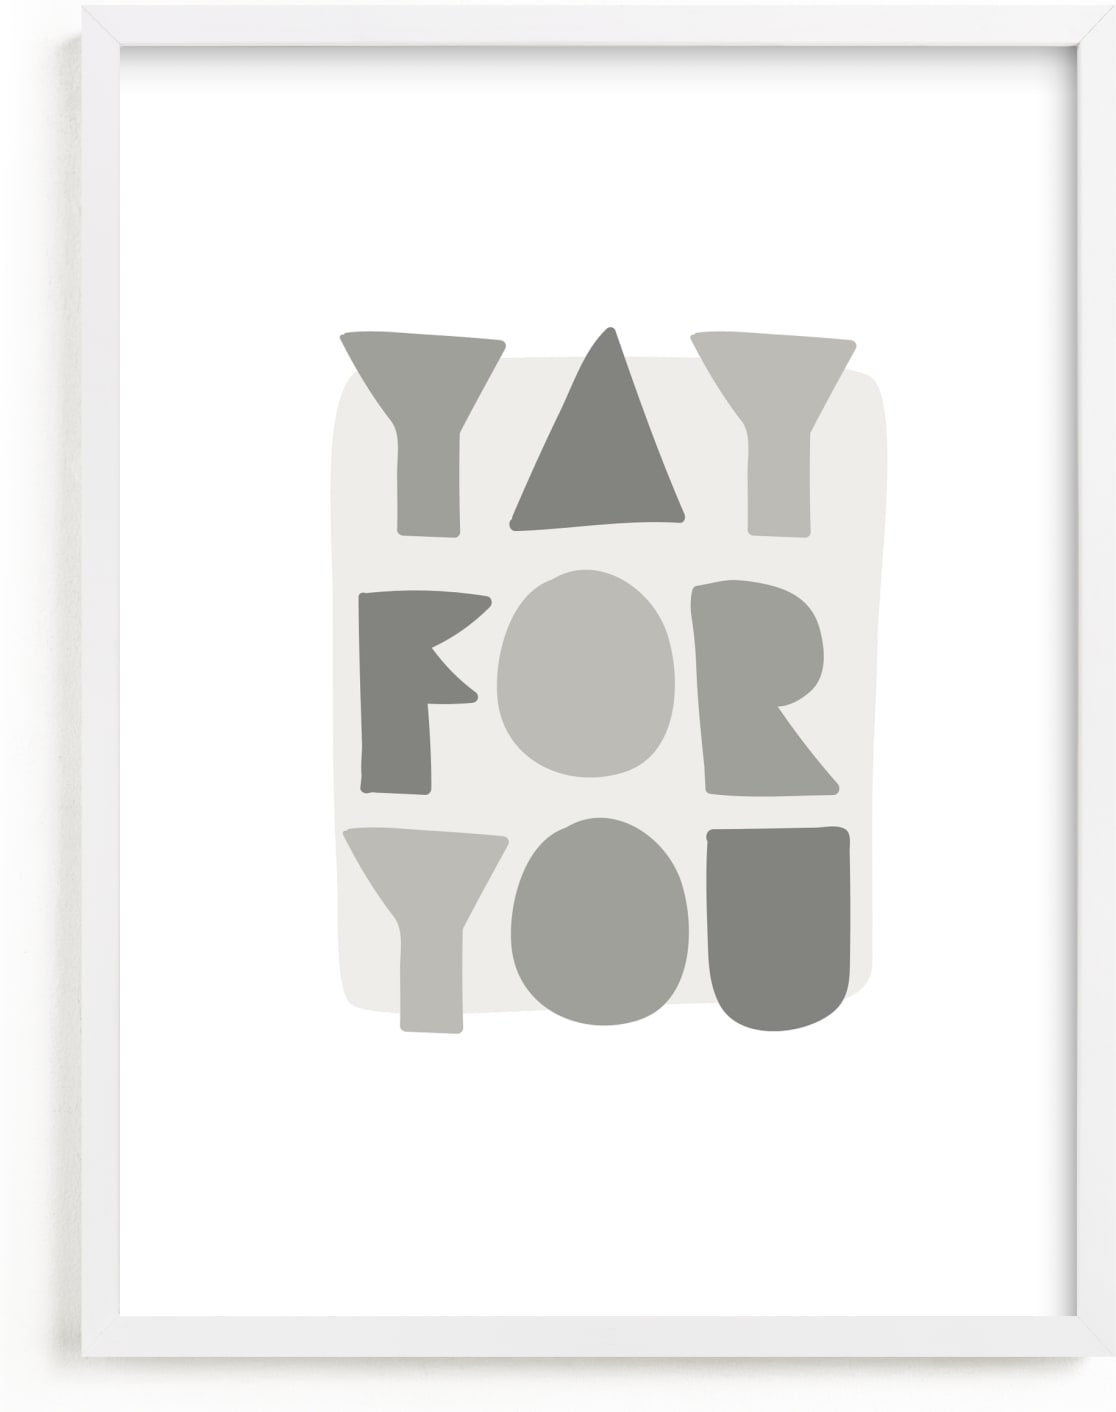 This is a grey kids wall art by Lea Delaveris called Yay for you.